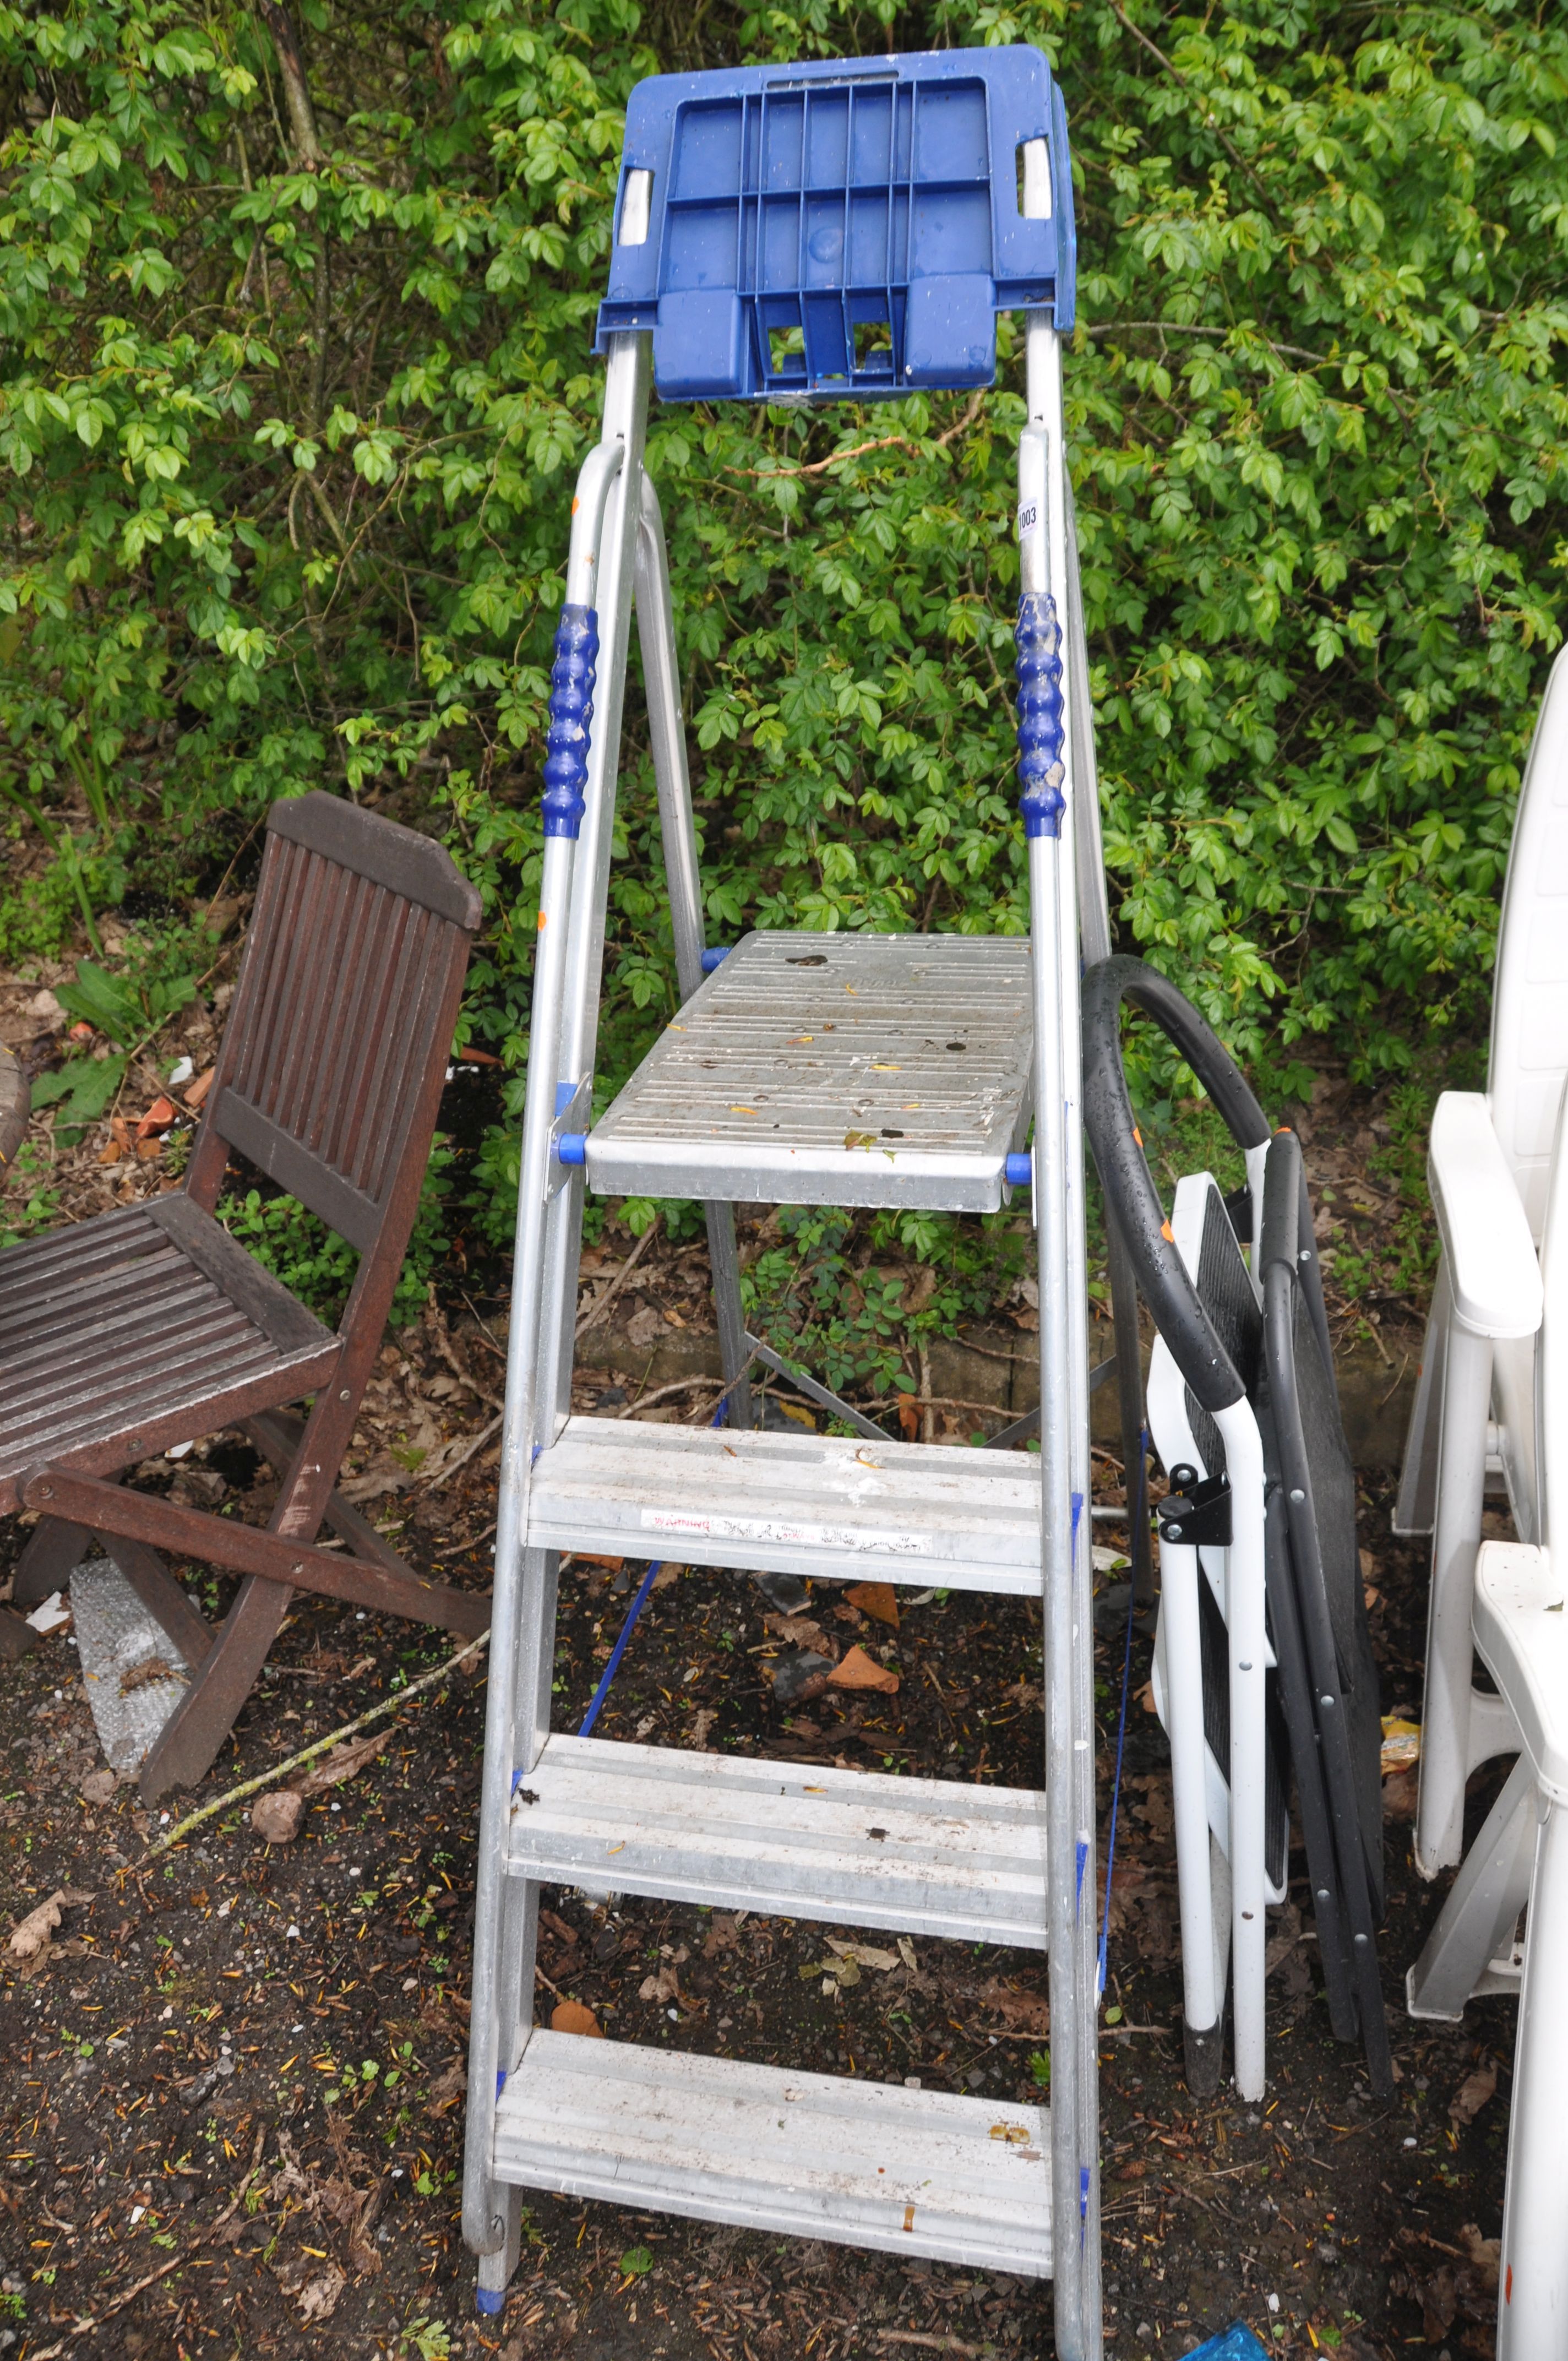 AN ALUMINIUM STEP LADDER, two steel steps and two folding plastic garden chairs (5) - Image 2 of 3